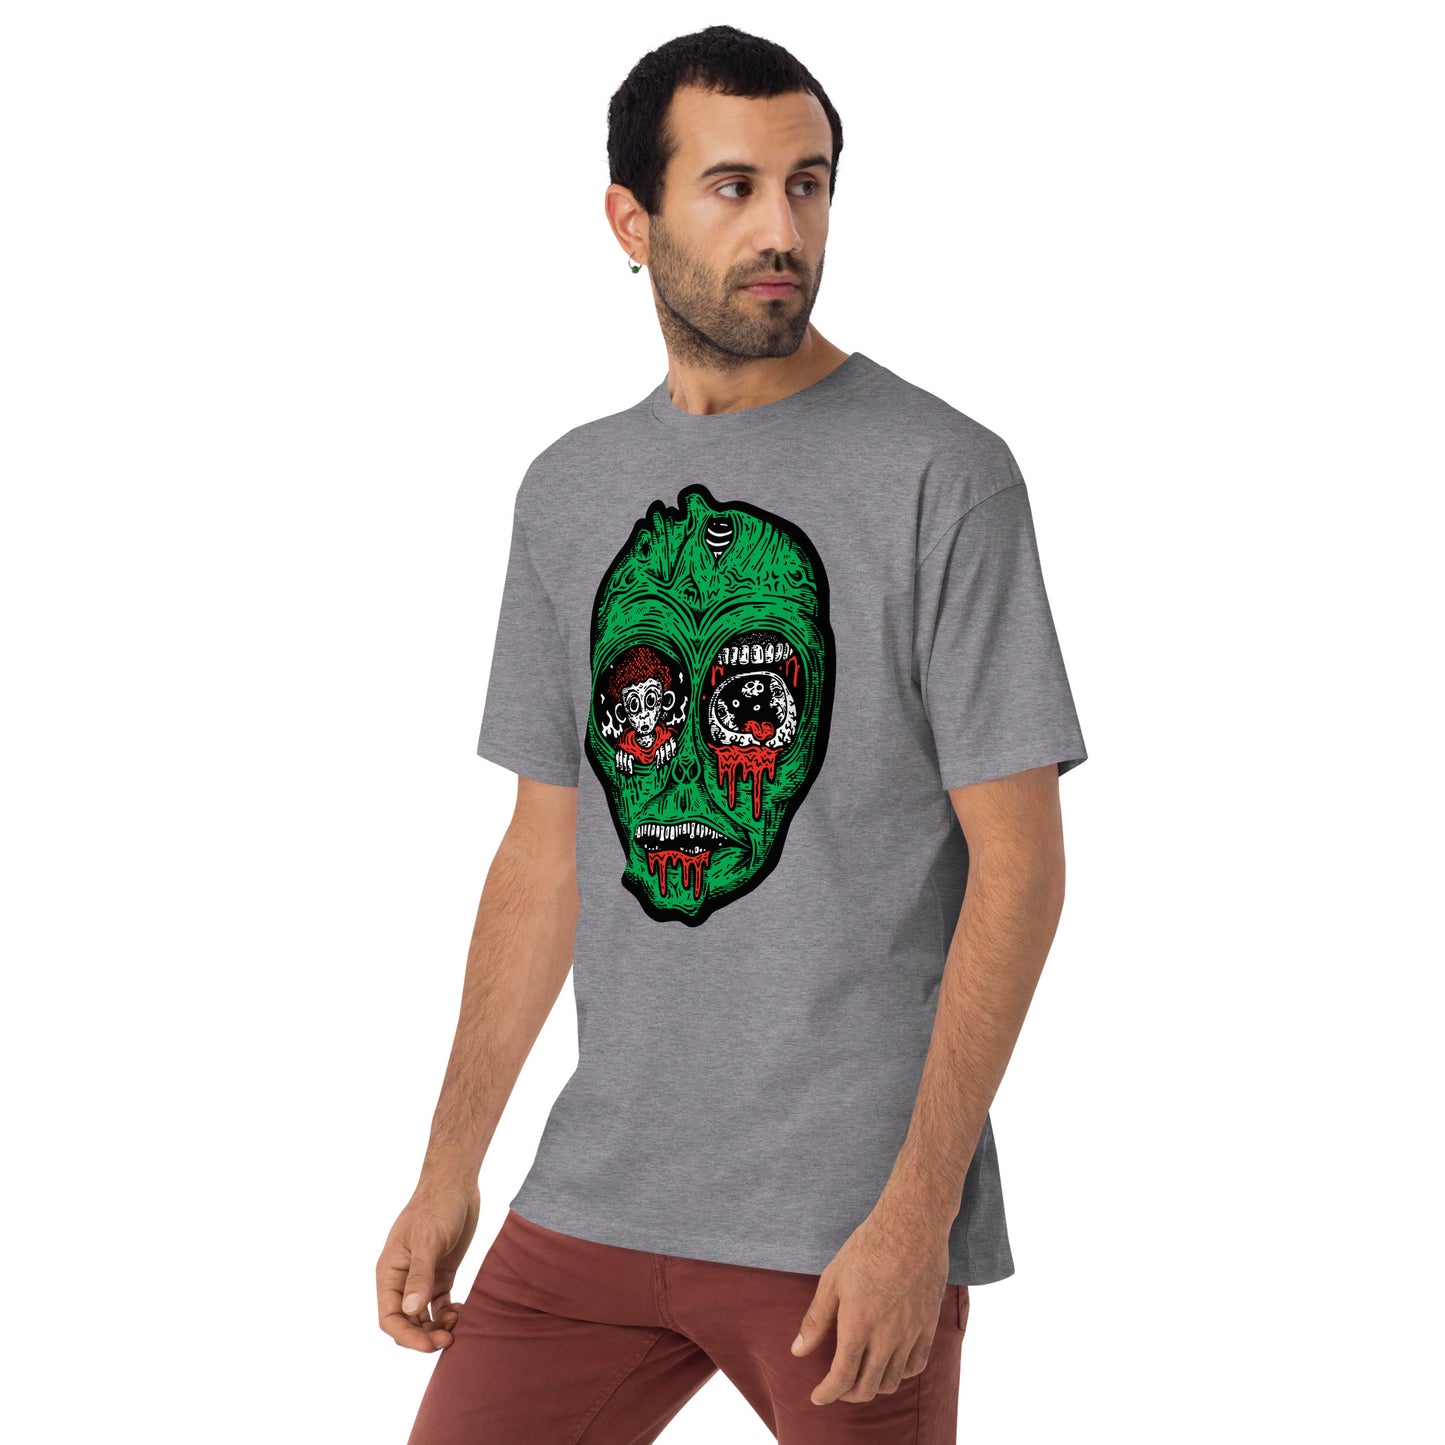 Zed Sees All T Shirt